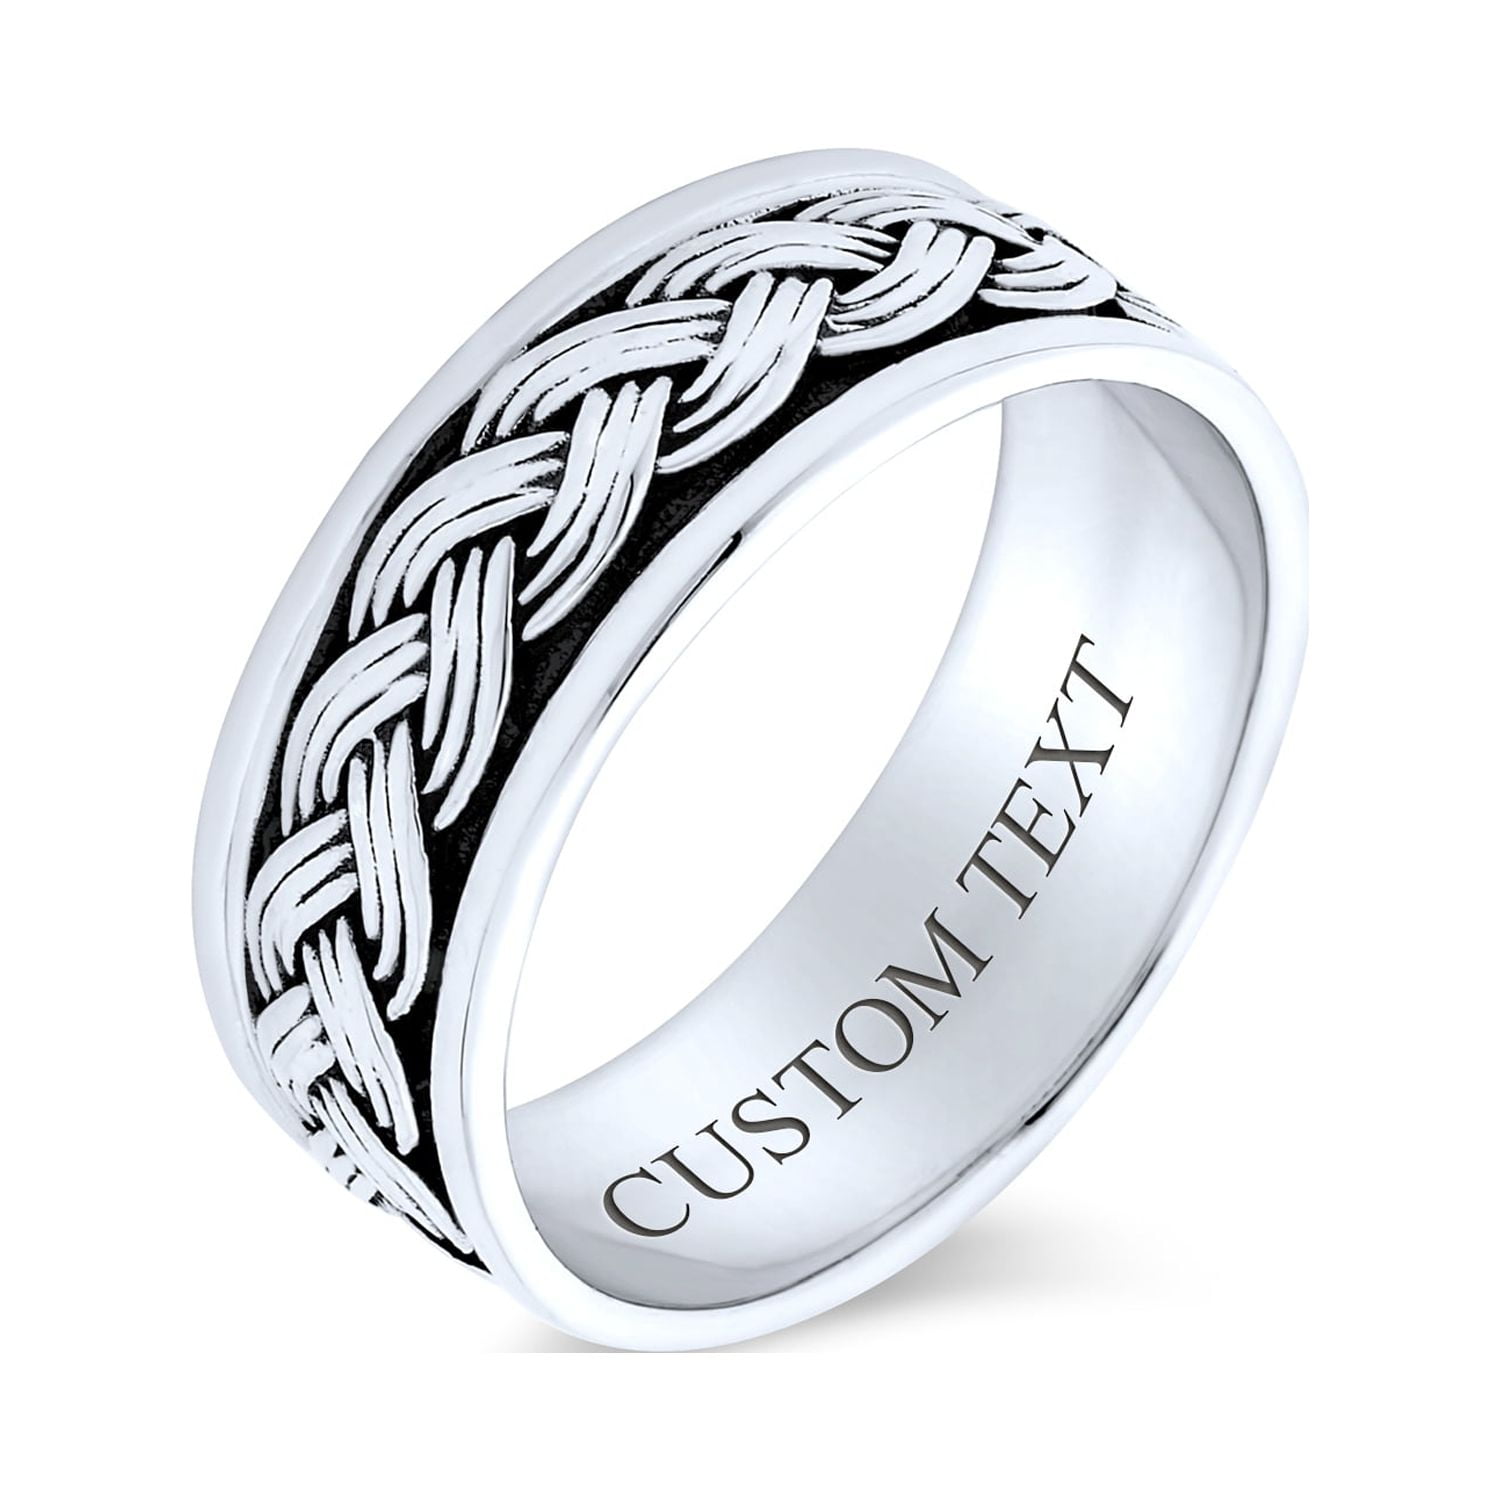 Bling Jewelry Men's Wheat Rope Braid Cable Wedding Band Ring .925 Sterling  Silver 